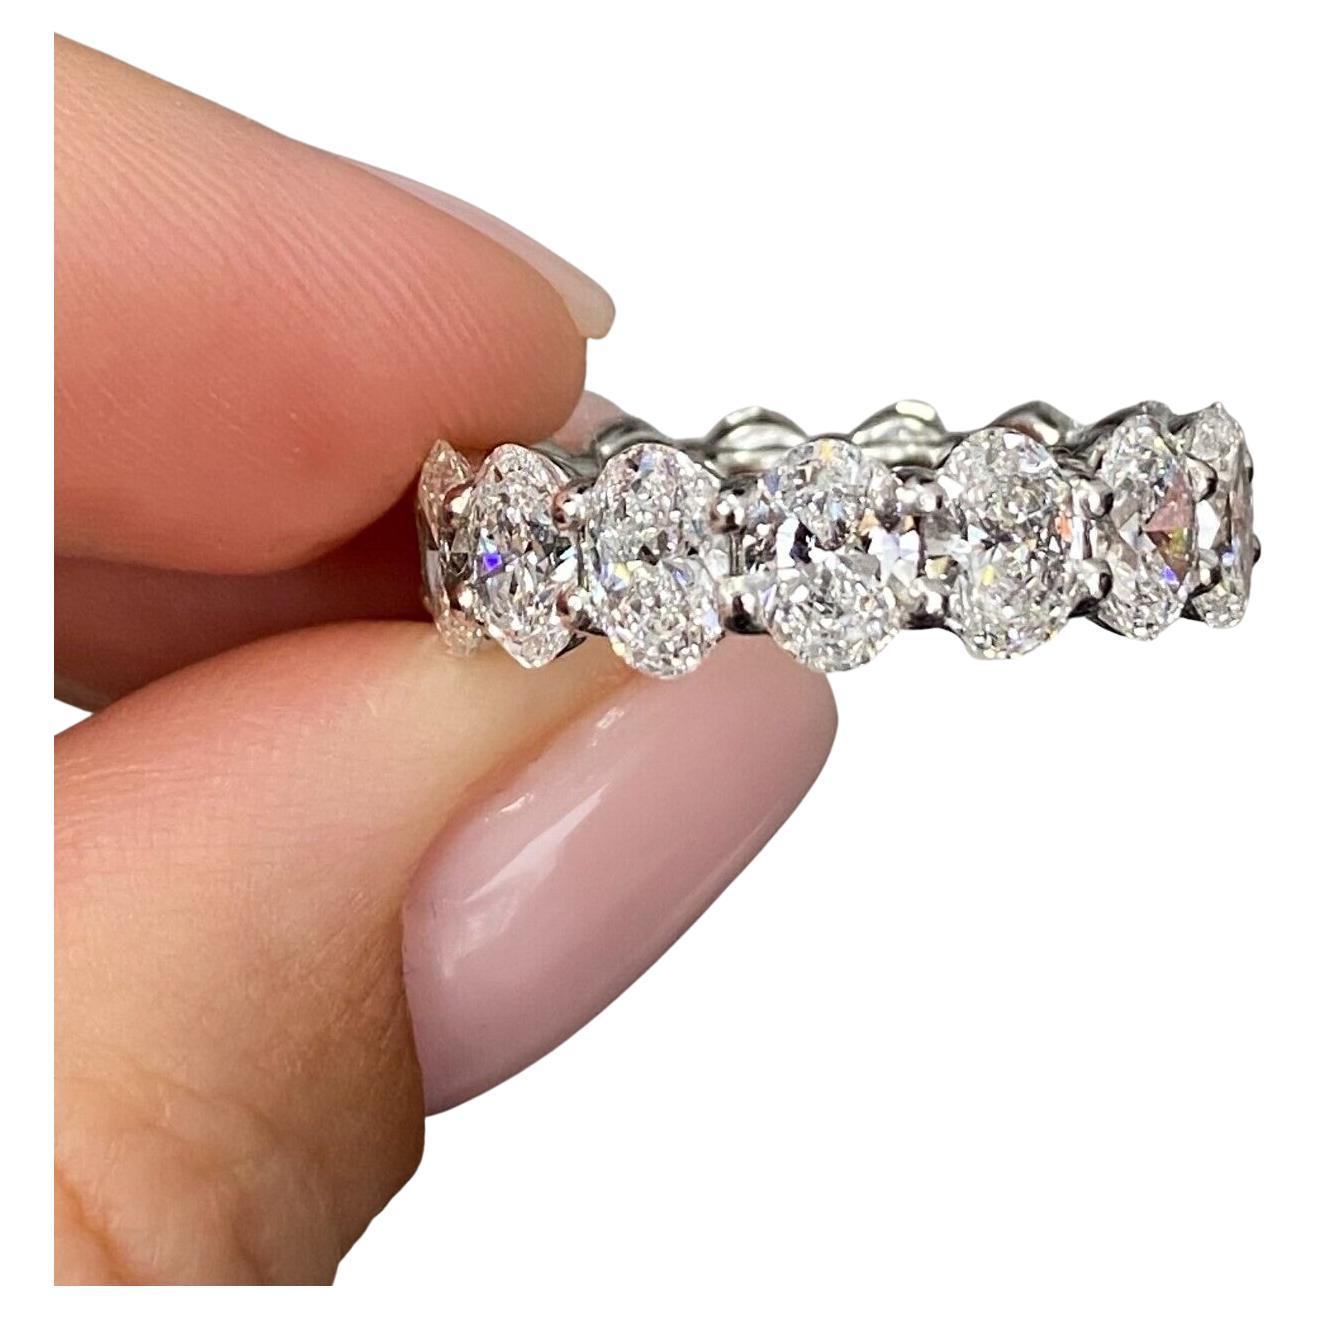 Platinum 6.08 Cts, Oval Diamond Eternity Ring Set w/ Shared Prongs High Quality